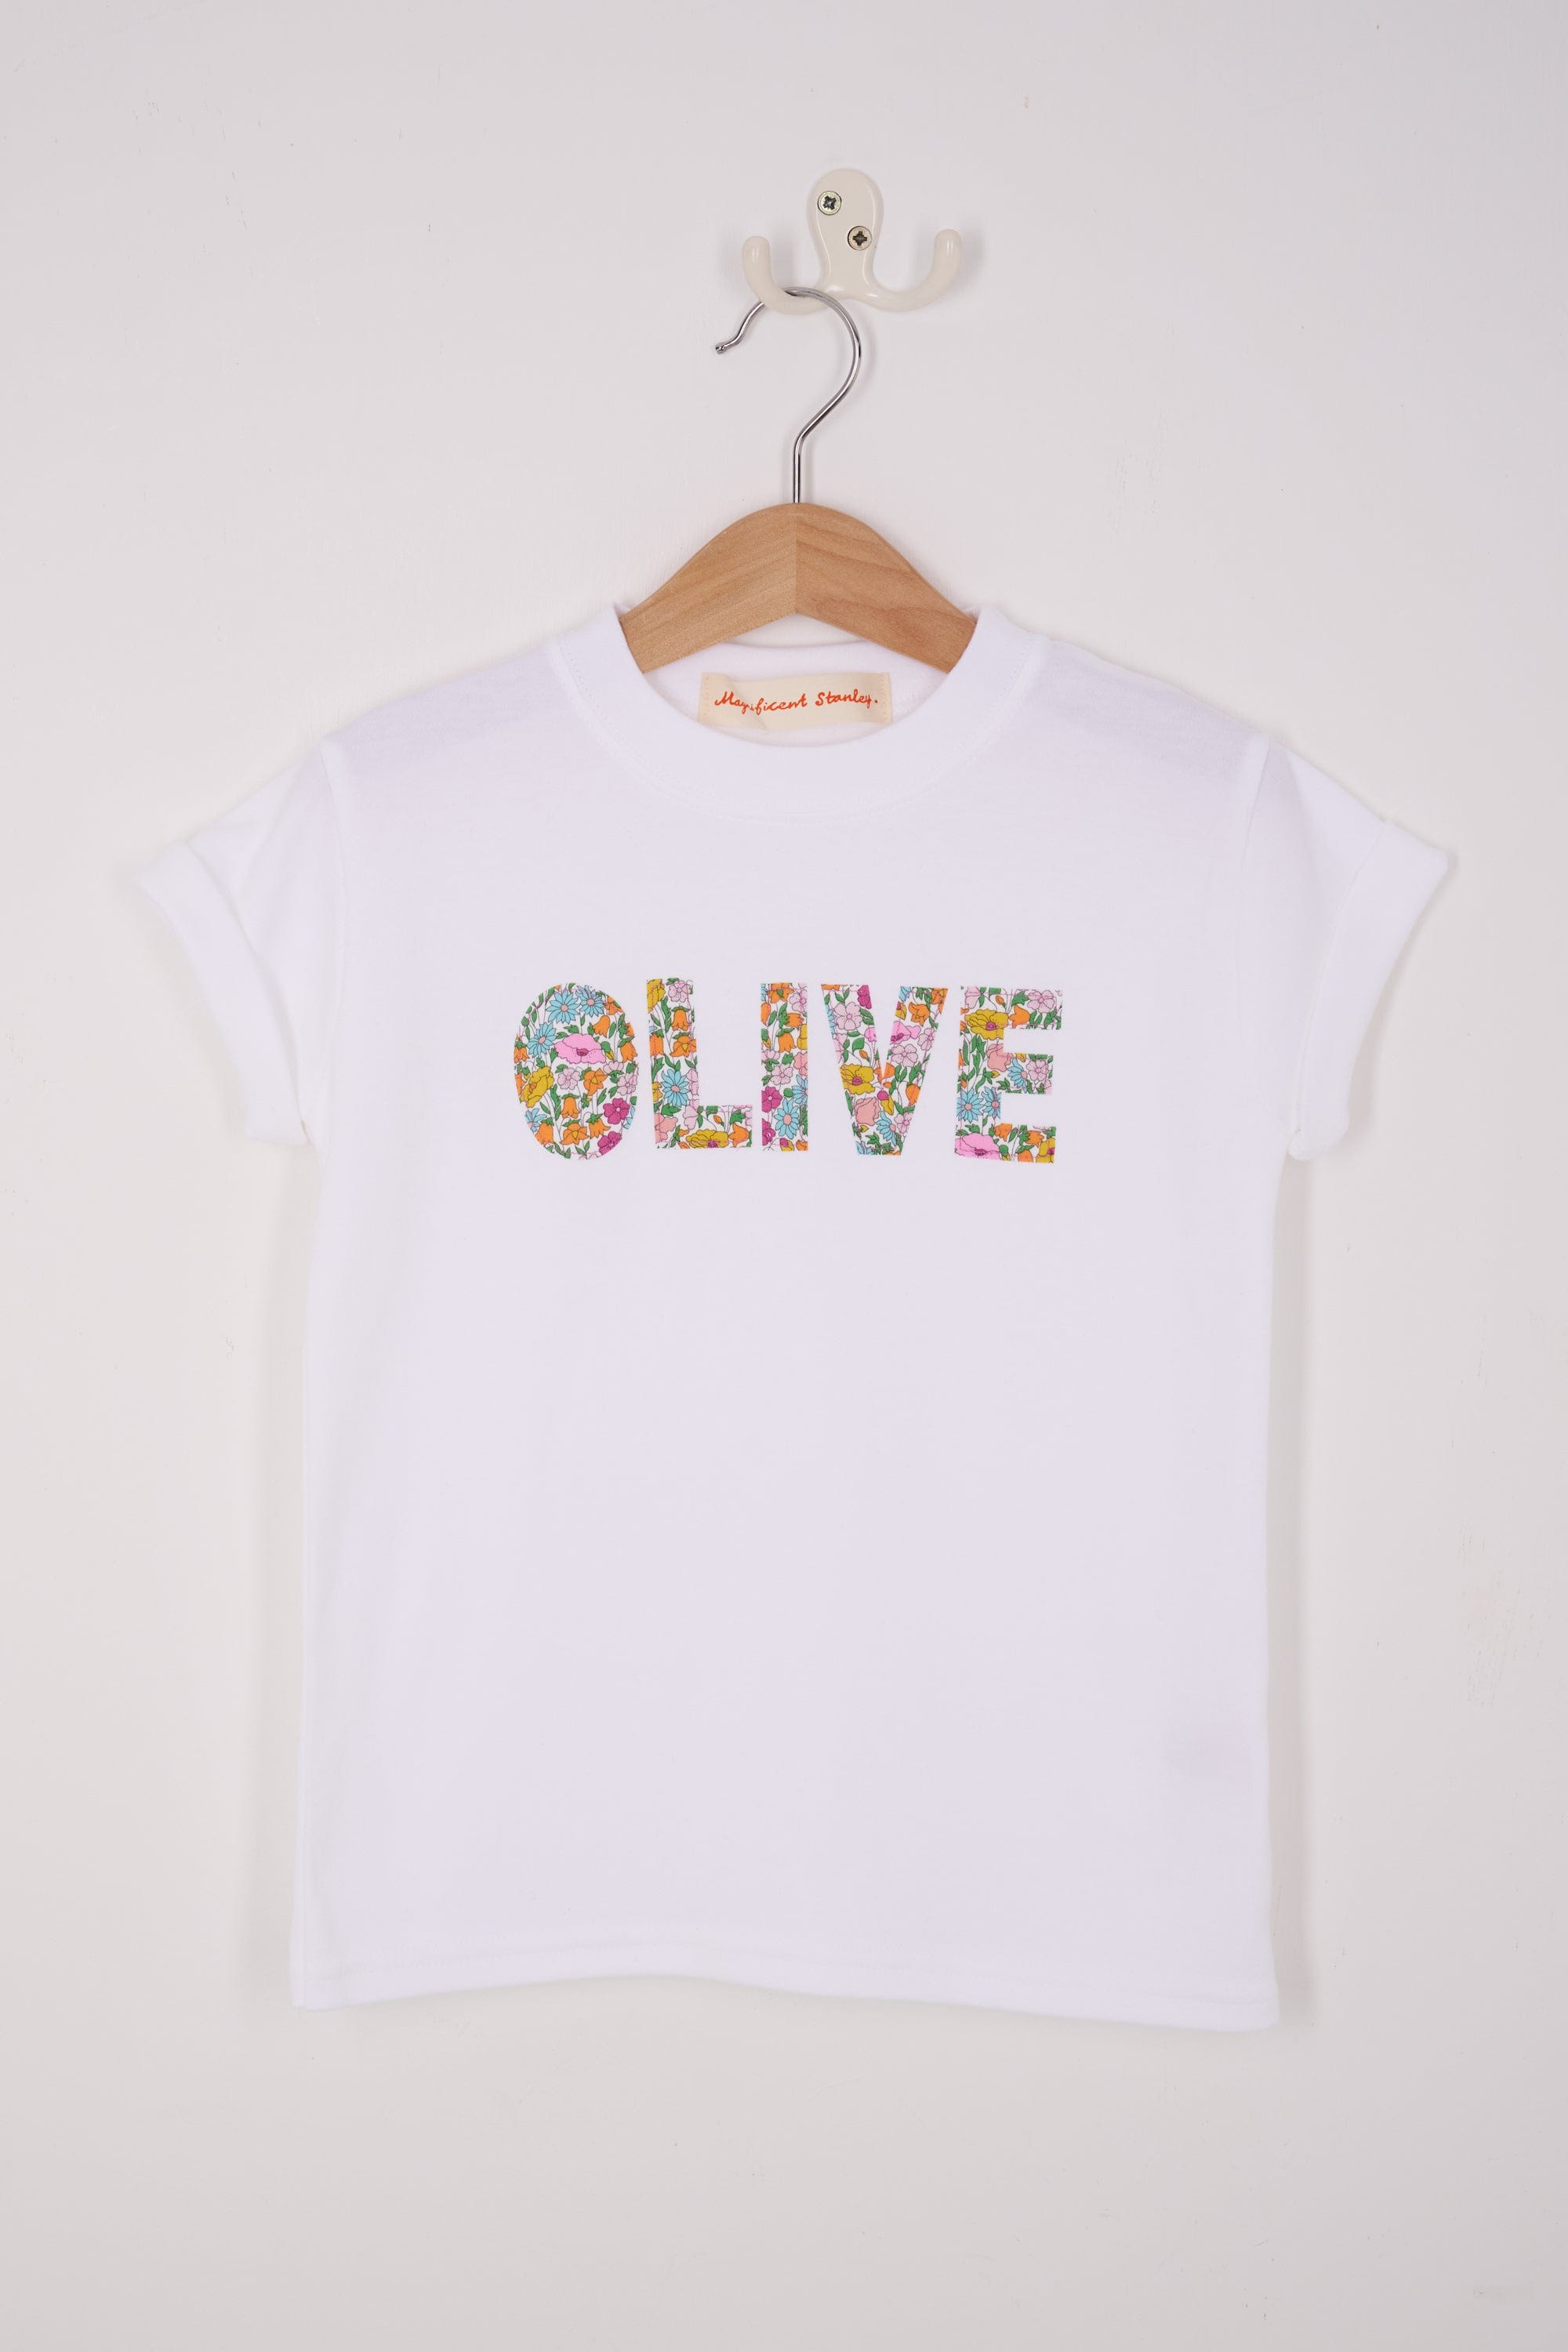 Magnificent Stanley Tee Name White T-Shirt in Choice of Liberty Print